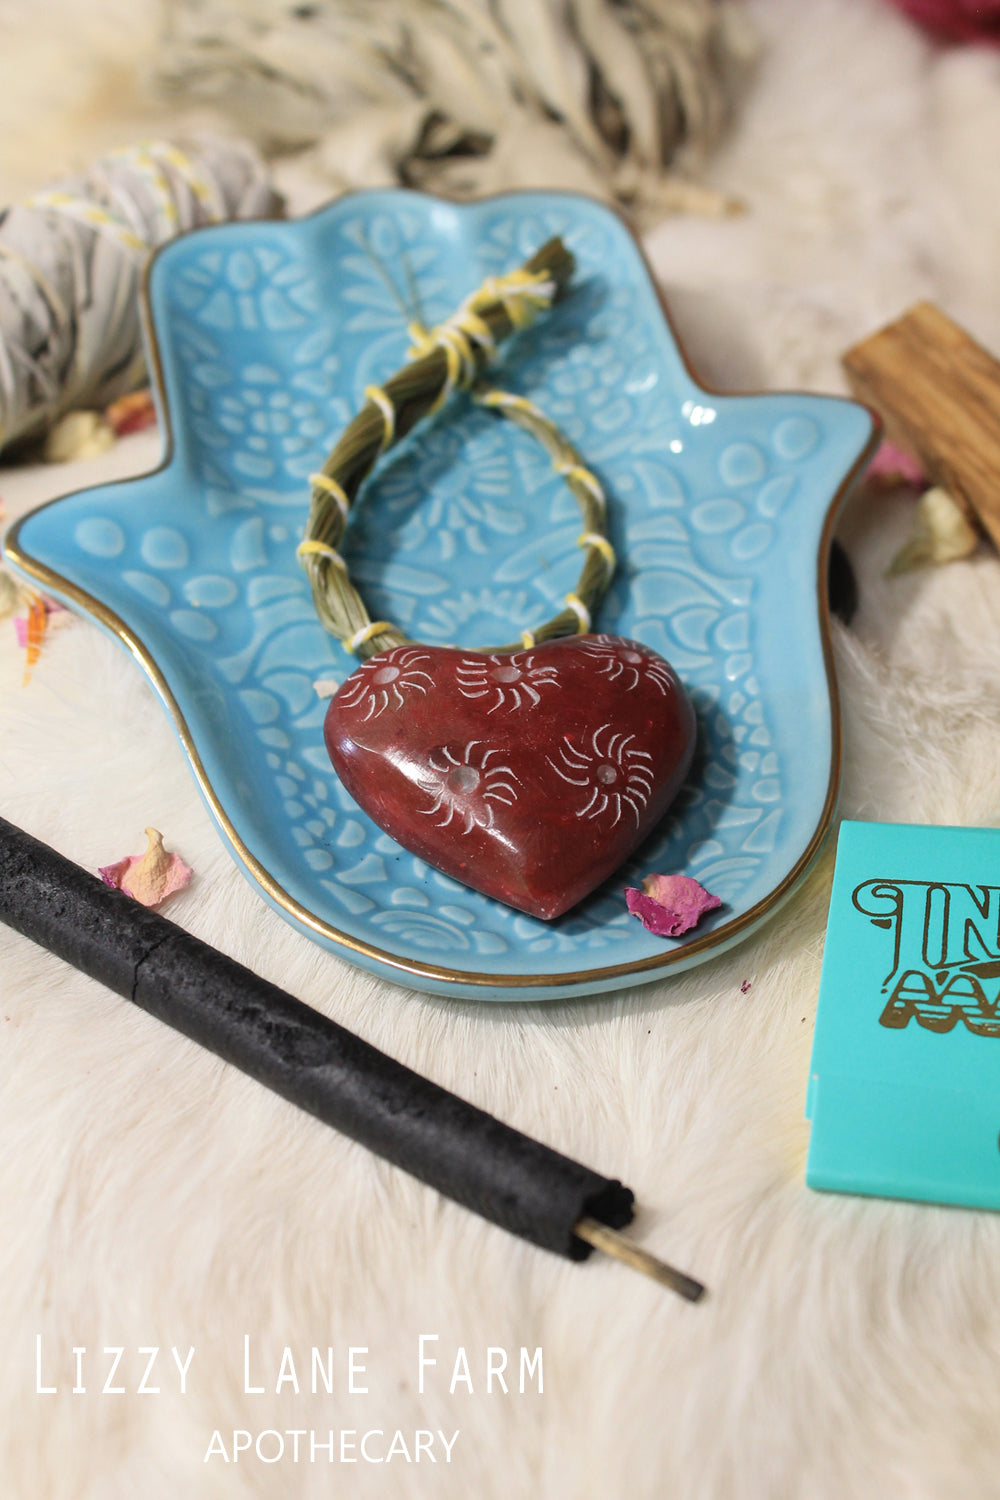 Hamsa Hand Smudge Kit | Brings it's owner happiness, luck, health, and good fortune.